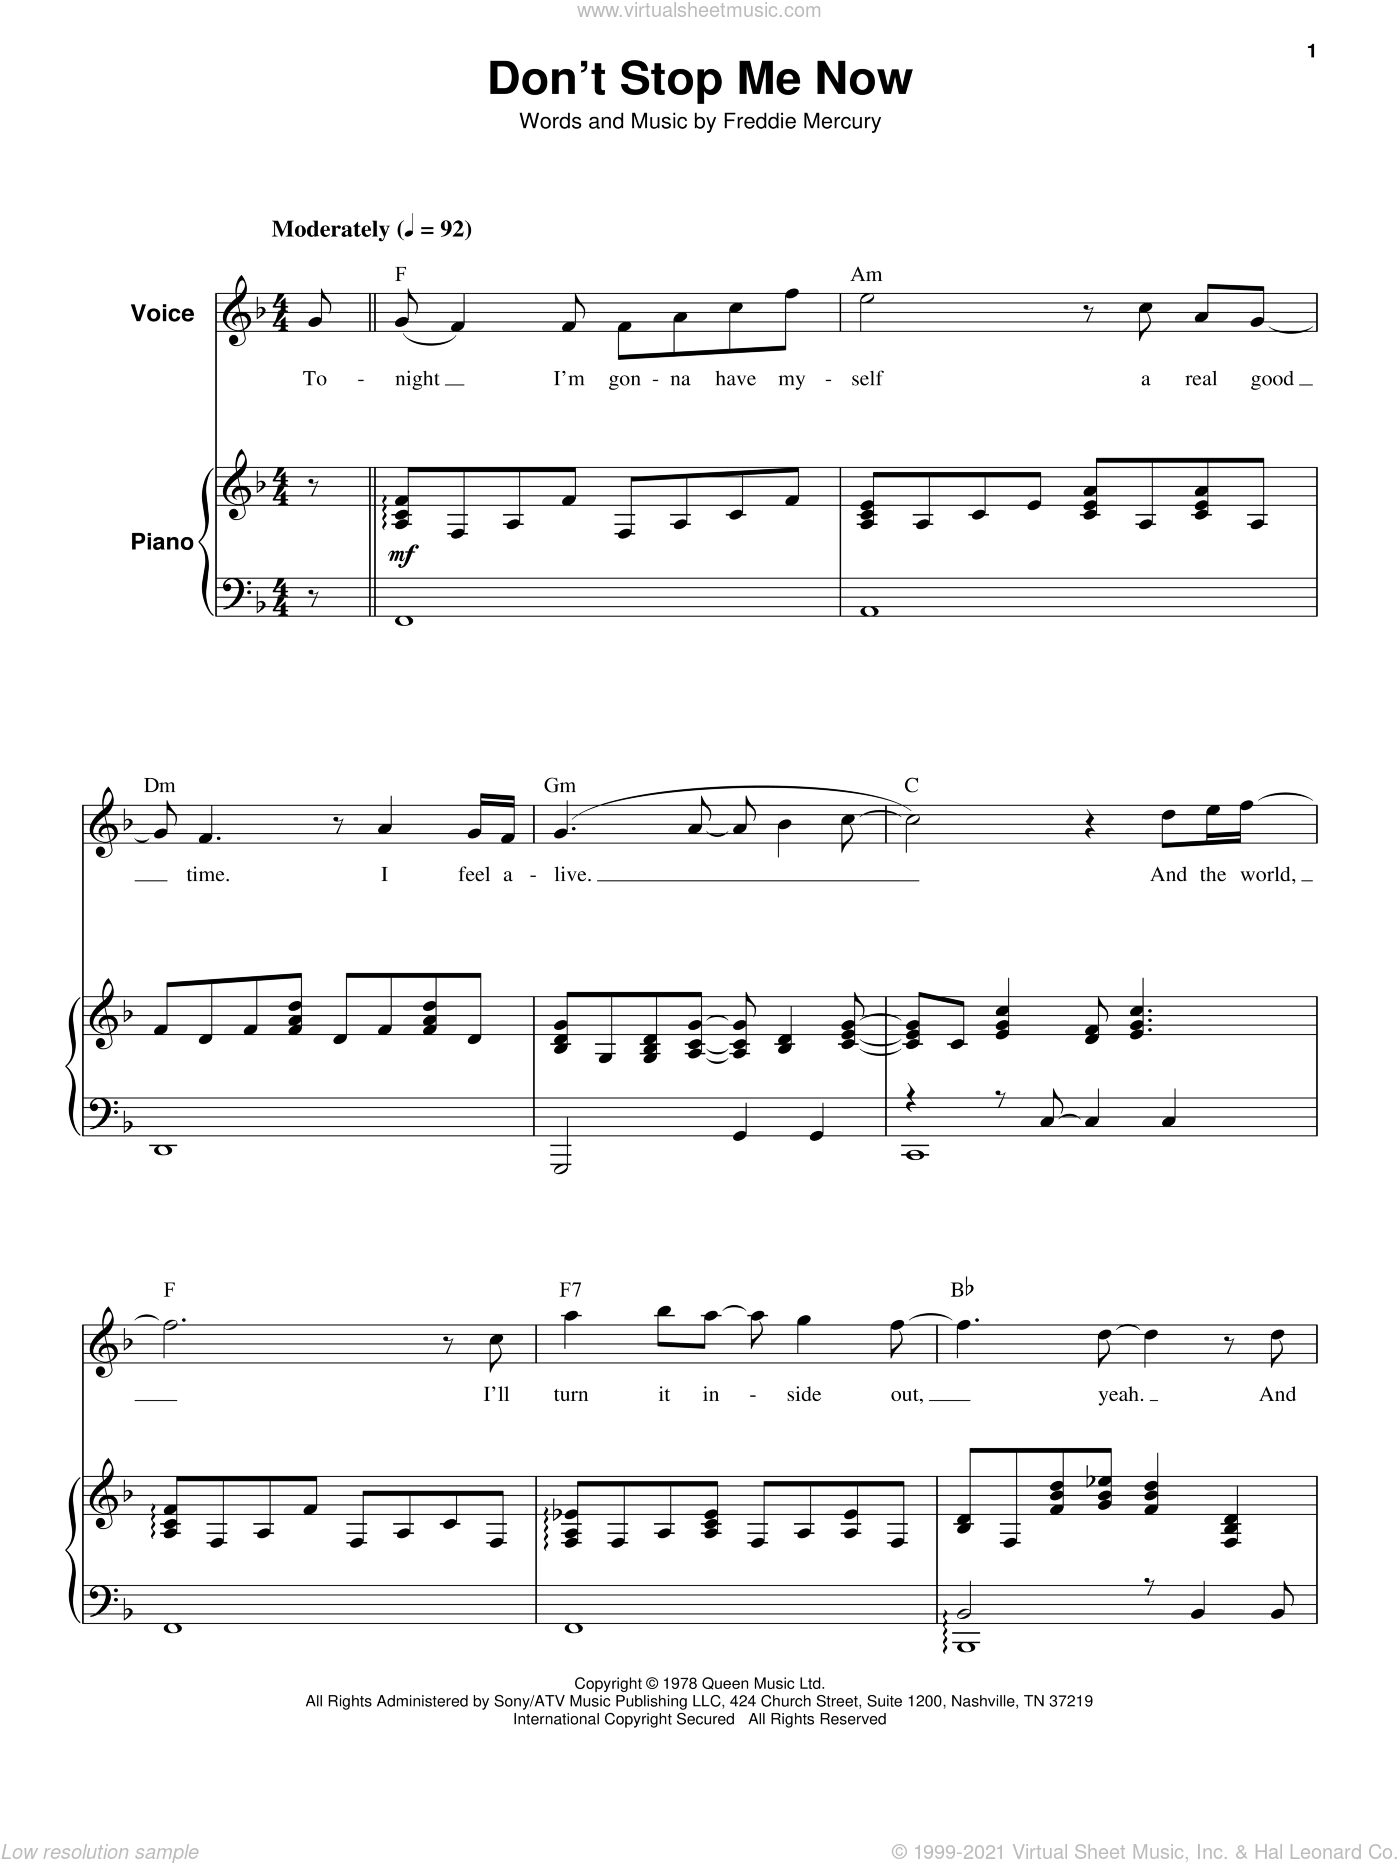 Queen - Don't Stop Me Now sheet music for keyboard or piano [PDF]